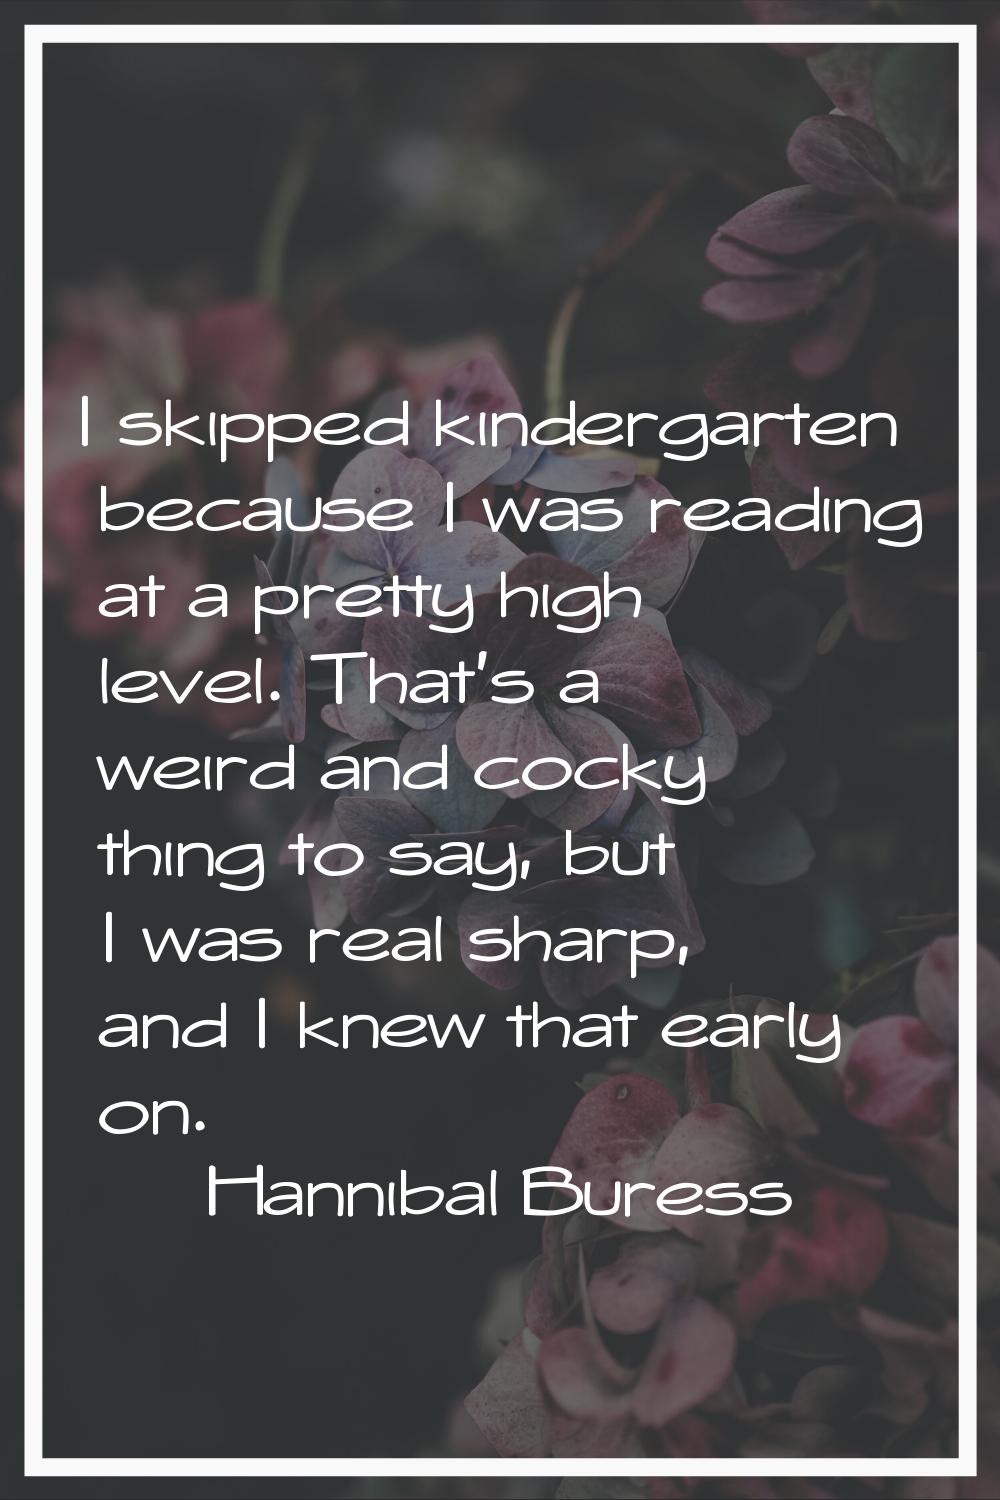 I skipped kindergarten because I was reading at a pretty high level. That's a weird and cocky thing